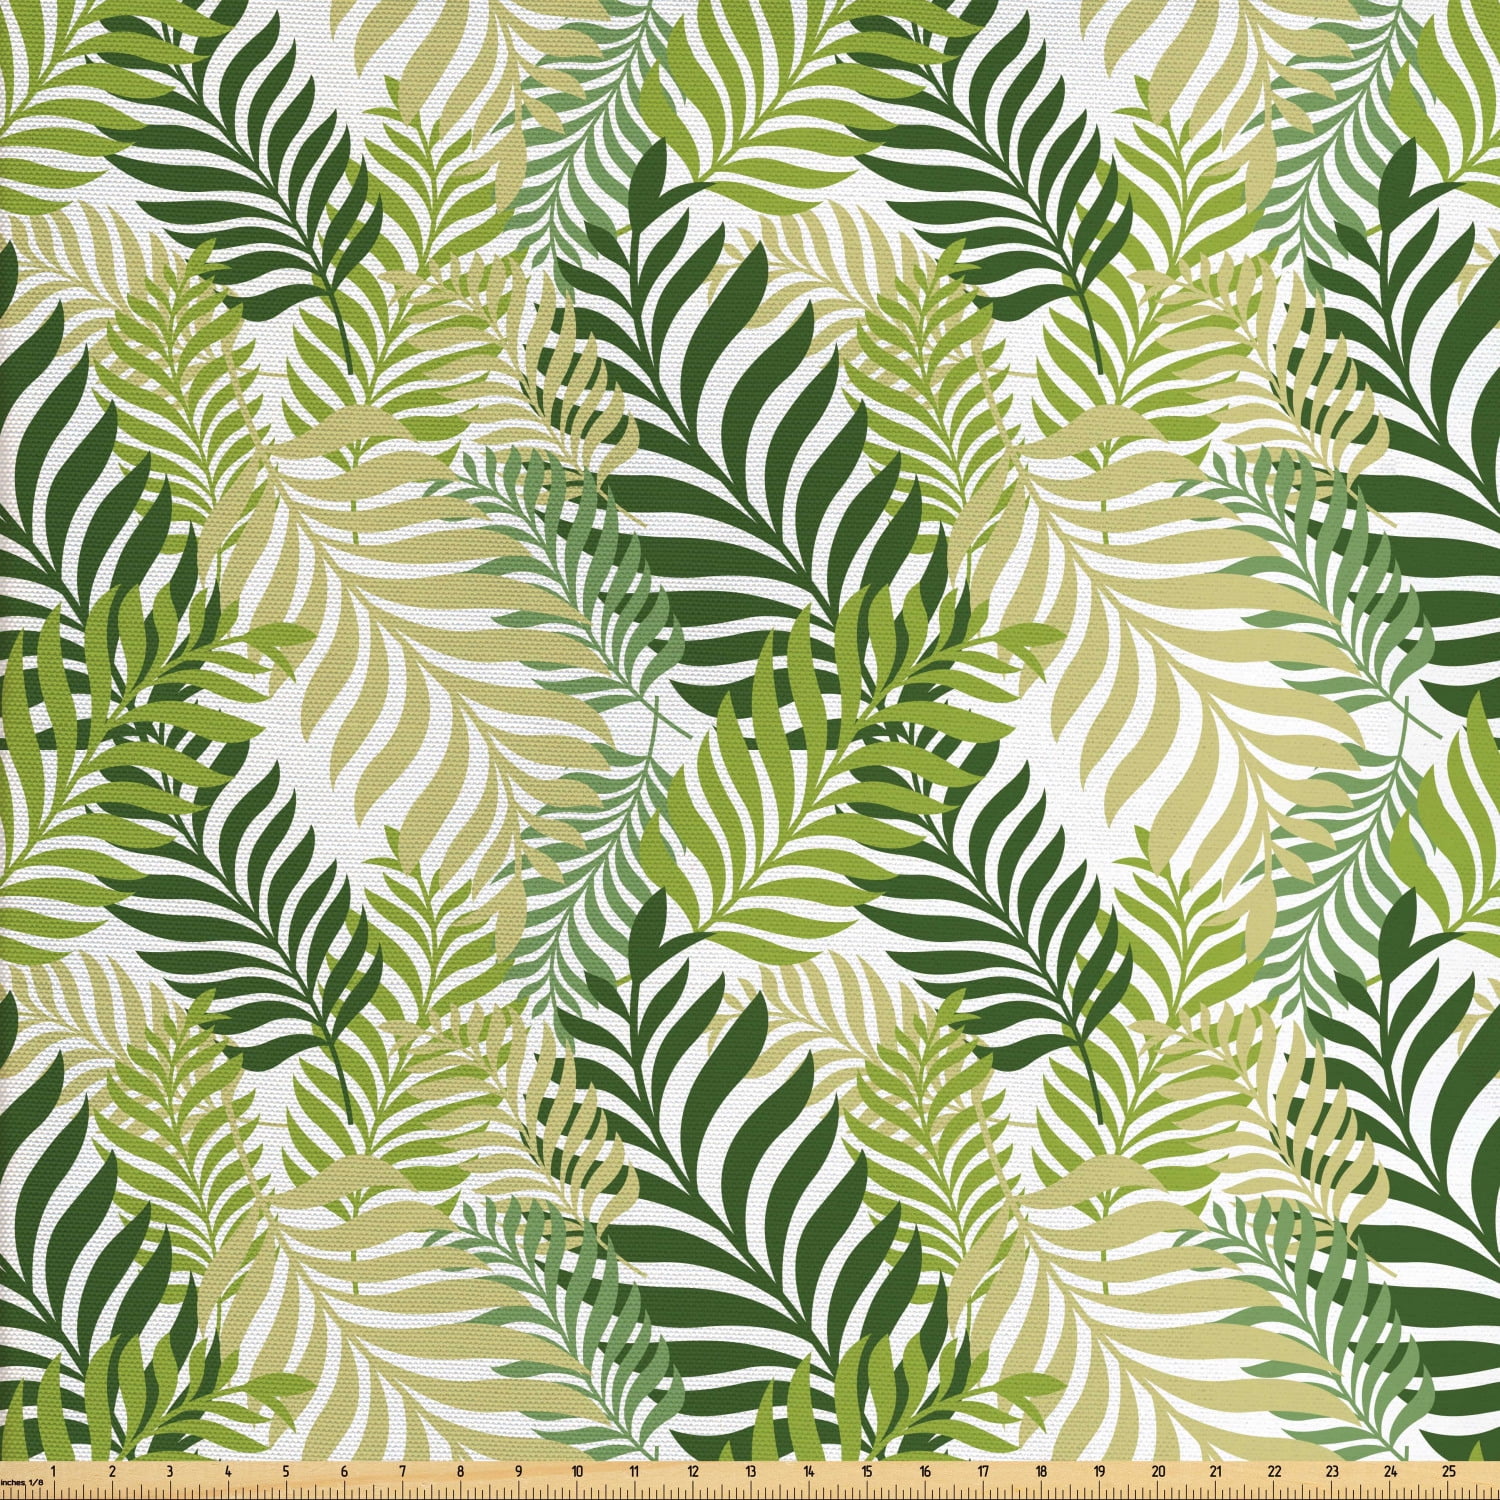 Leaf Fabric by The Yard, Tropic Exotic Palm Tree Leaves Natural